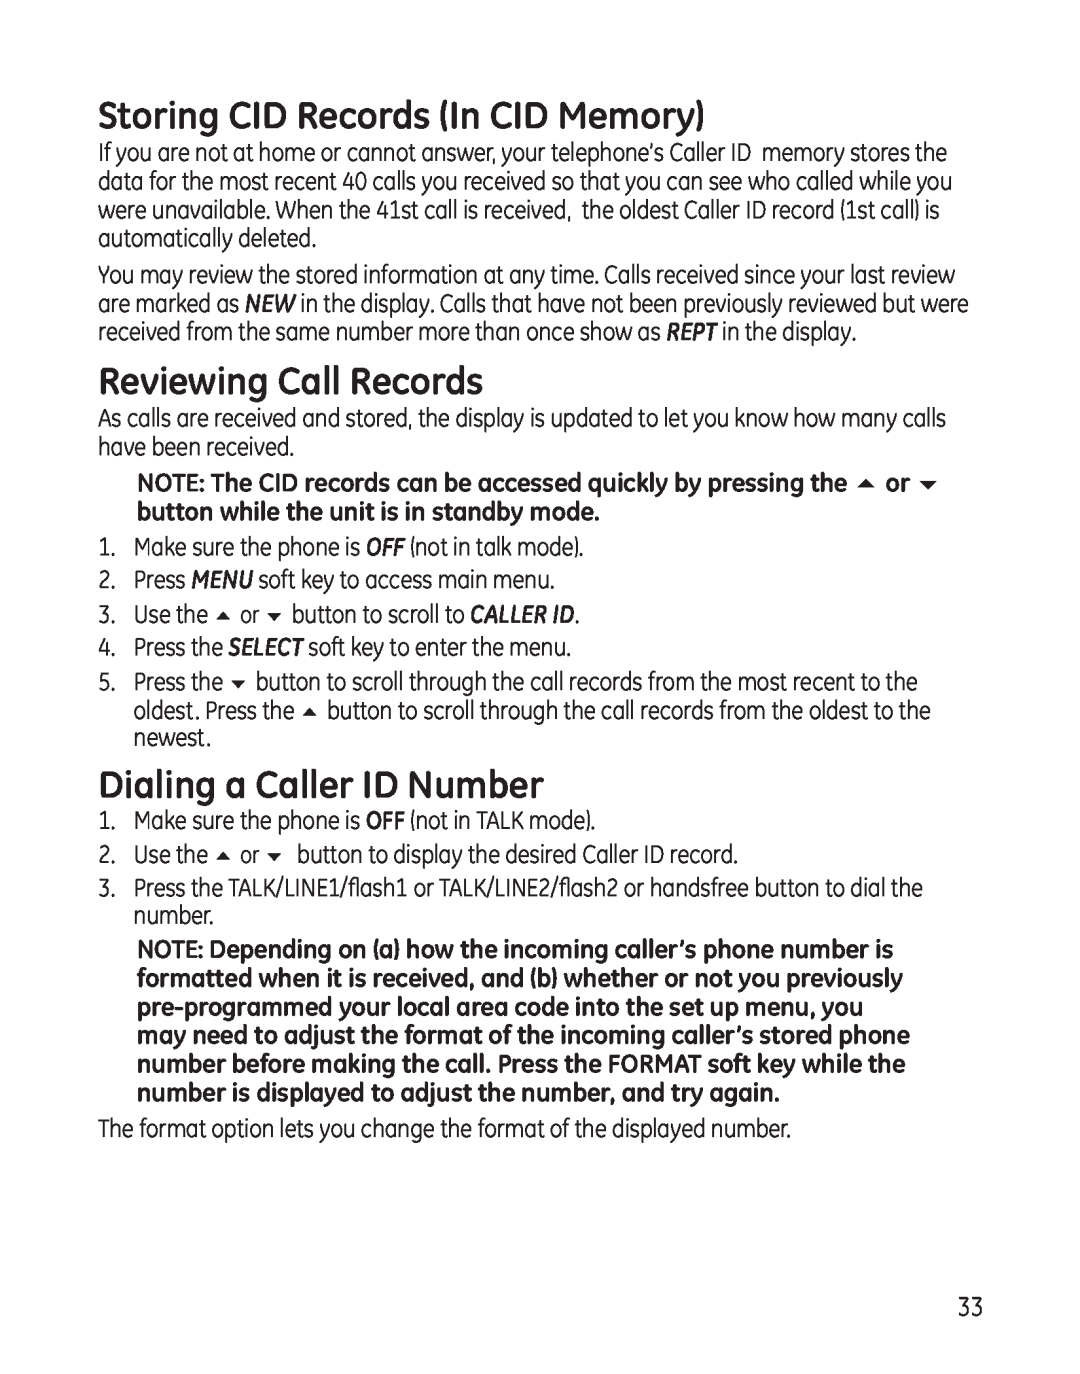 GE 25865 manual Storing CID Records In CID Memory, Reviewing Call Records, Dialing a Caller ID Number 